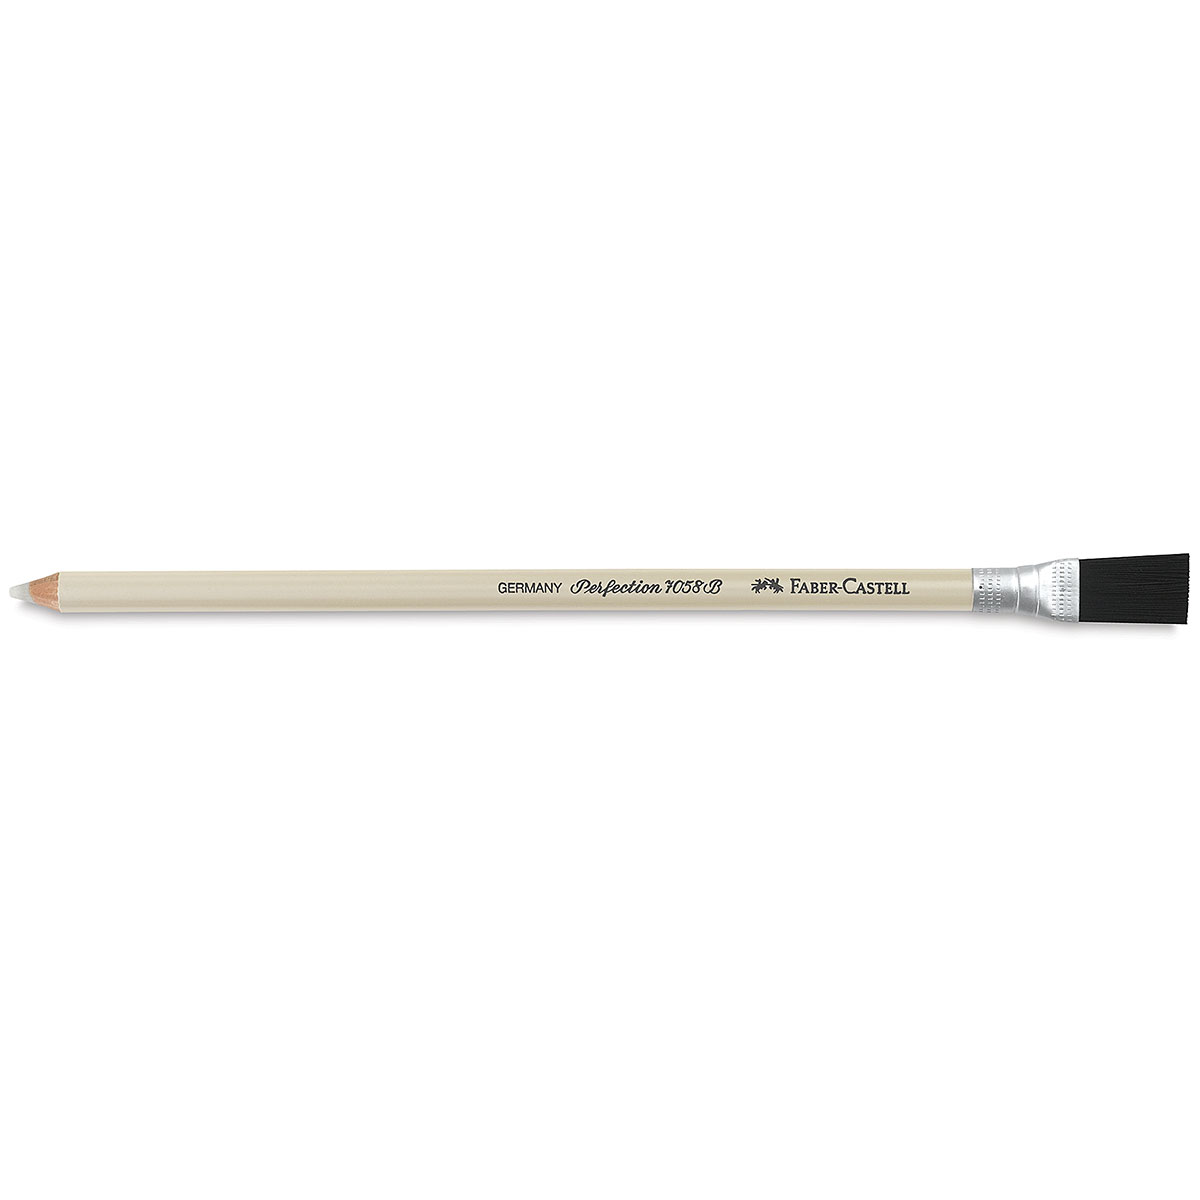 Faber Castell Perfection Eraser Pencil with Brush Box of 12 - Du